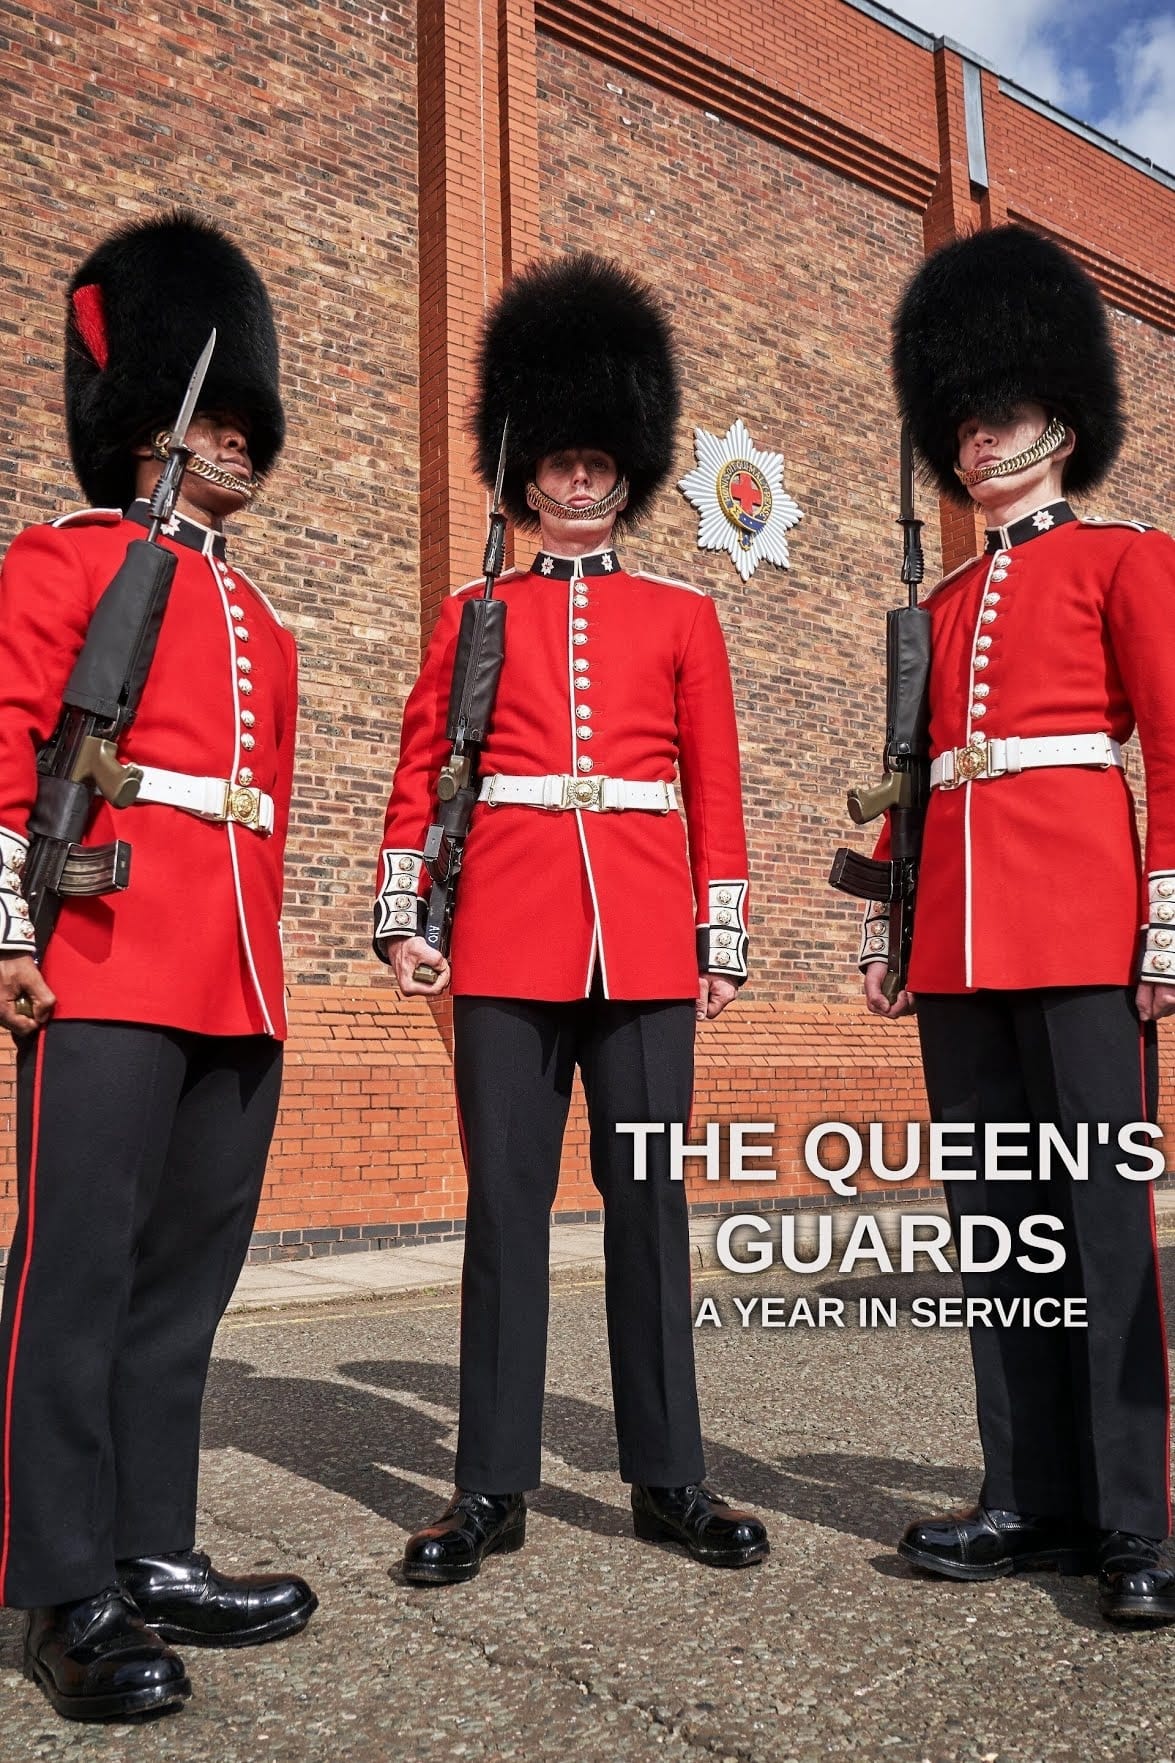 The Queen's Guards: On Her Majesty's Service TV Shows About Soldier